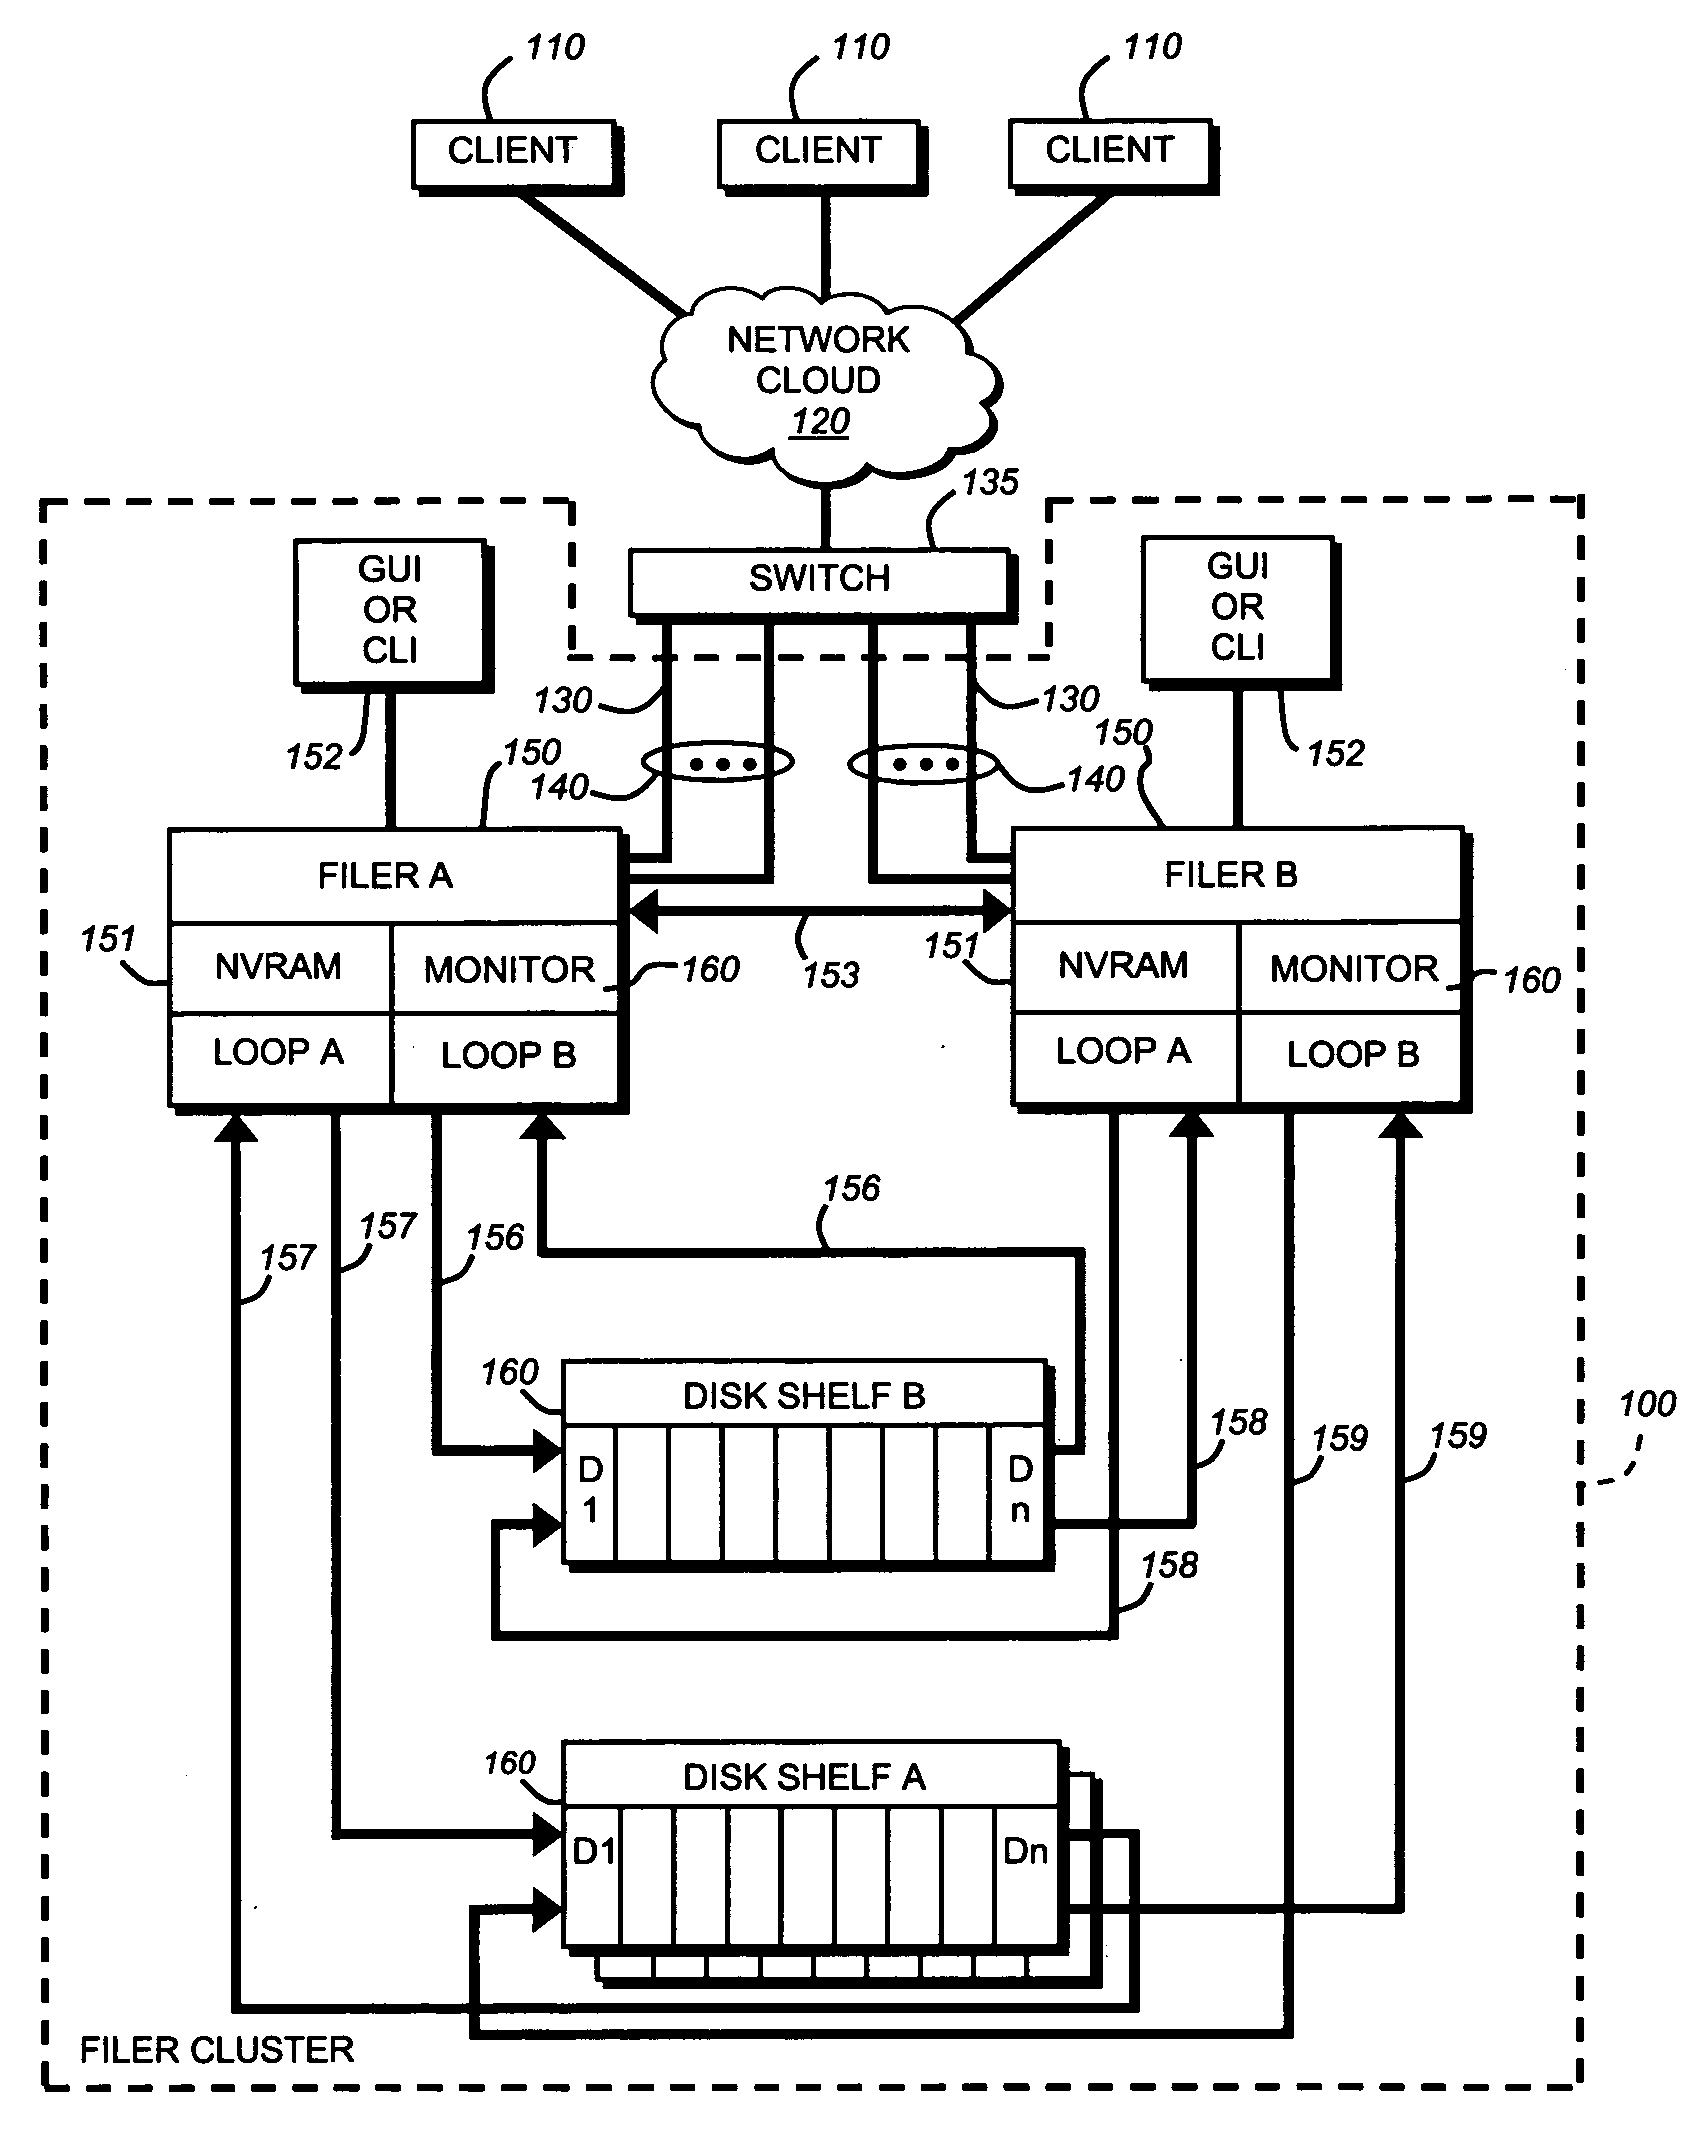 System and method for takeover of partner resources in conjunction with coredump